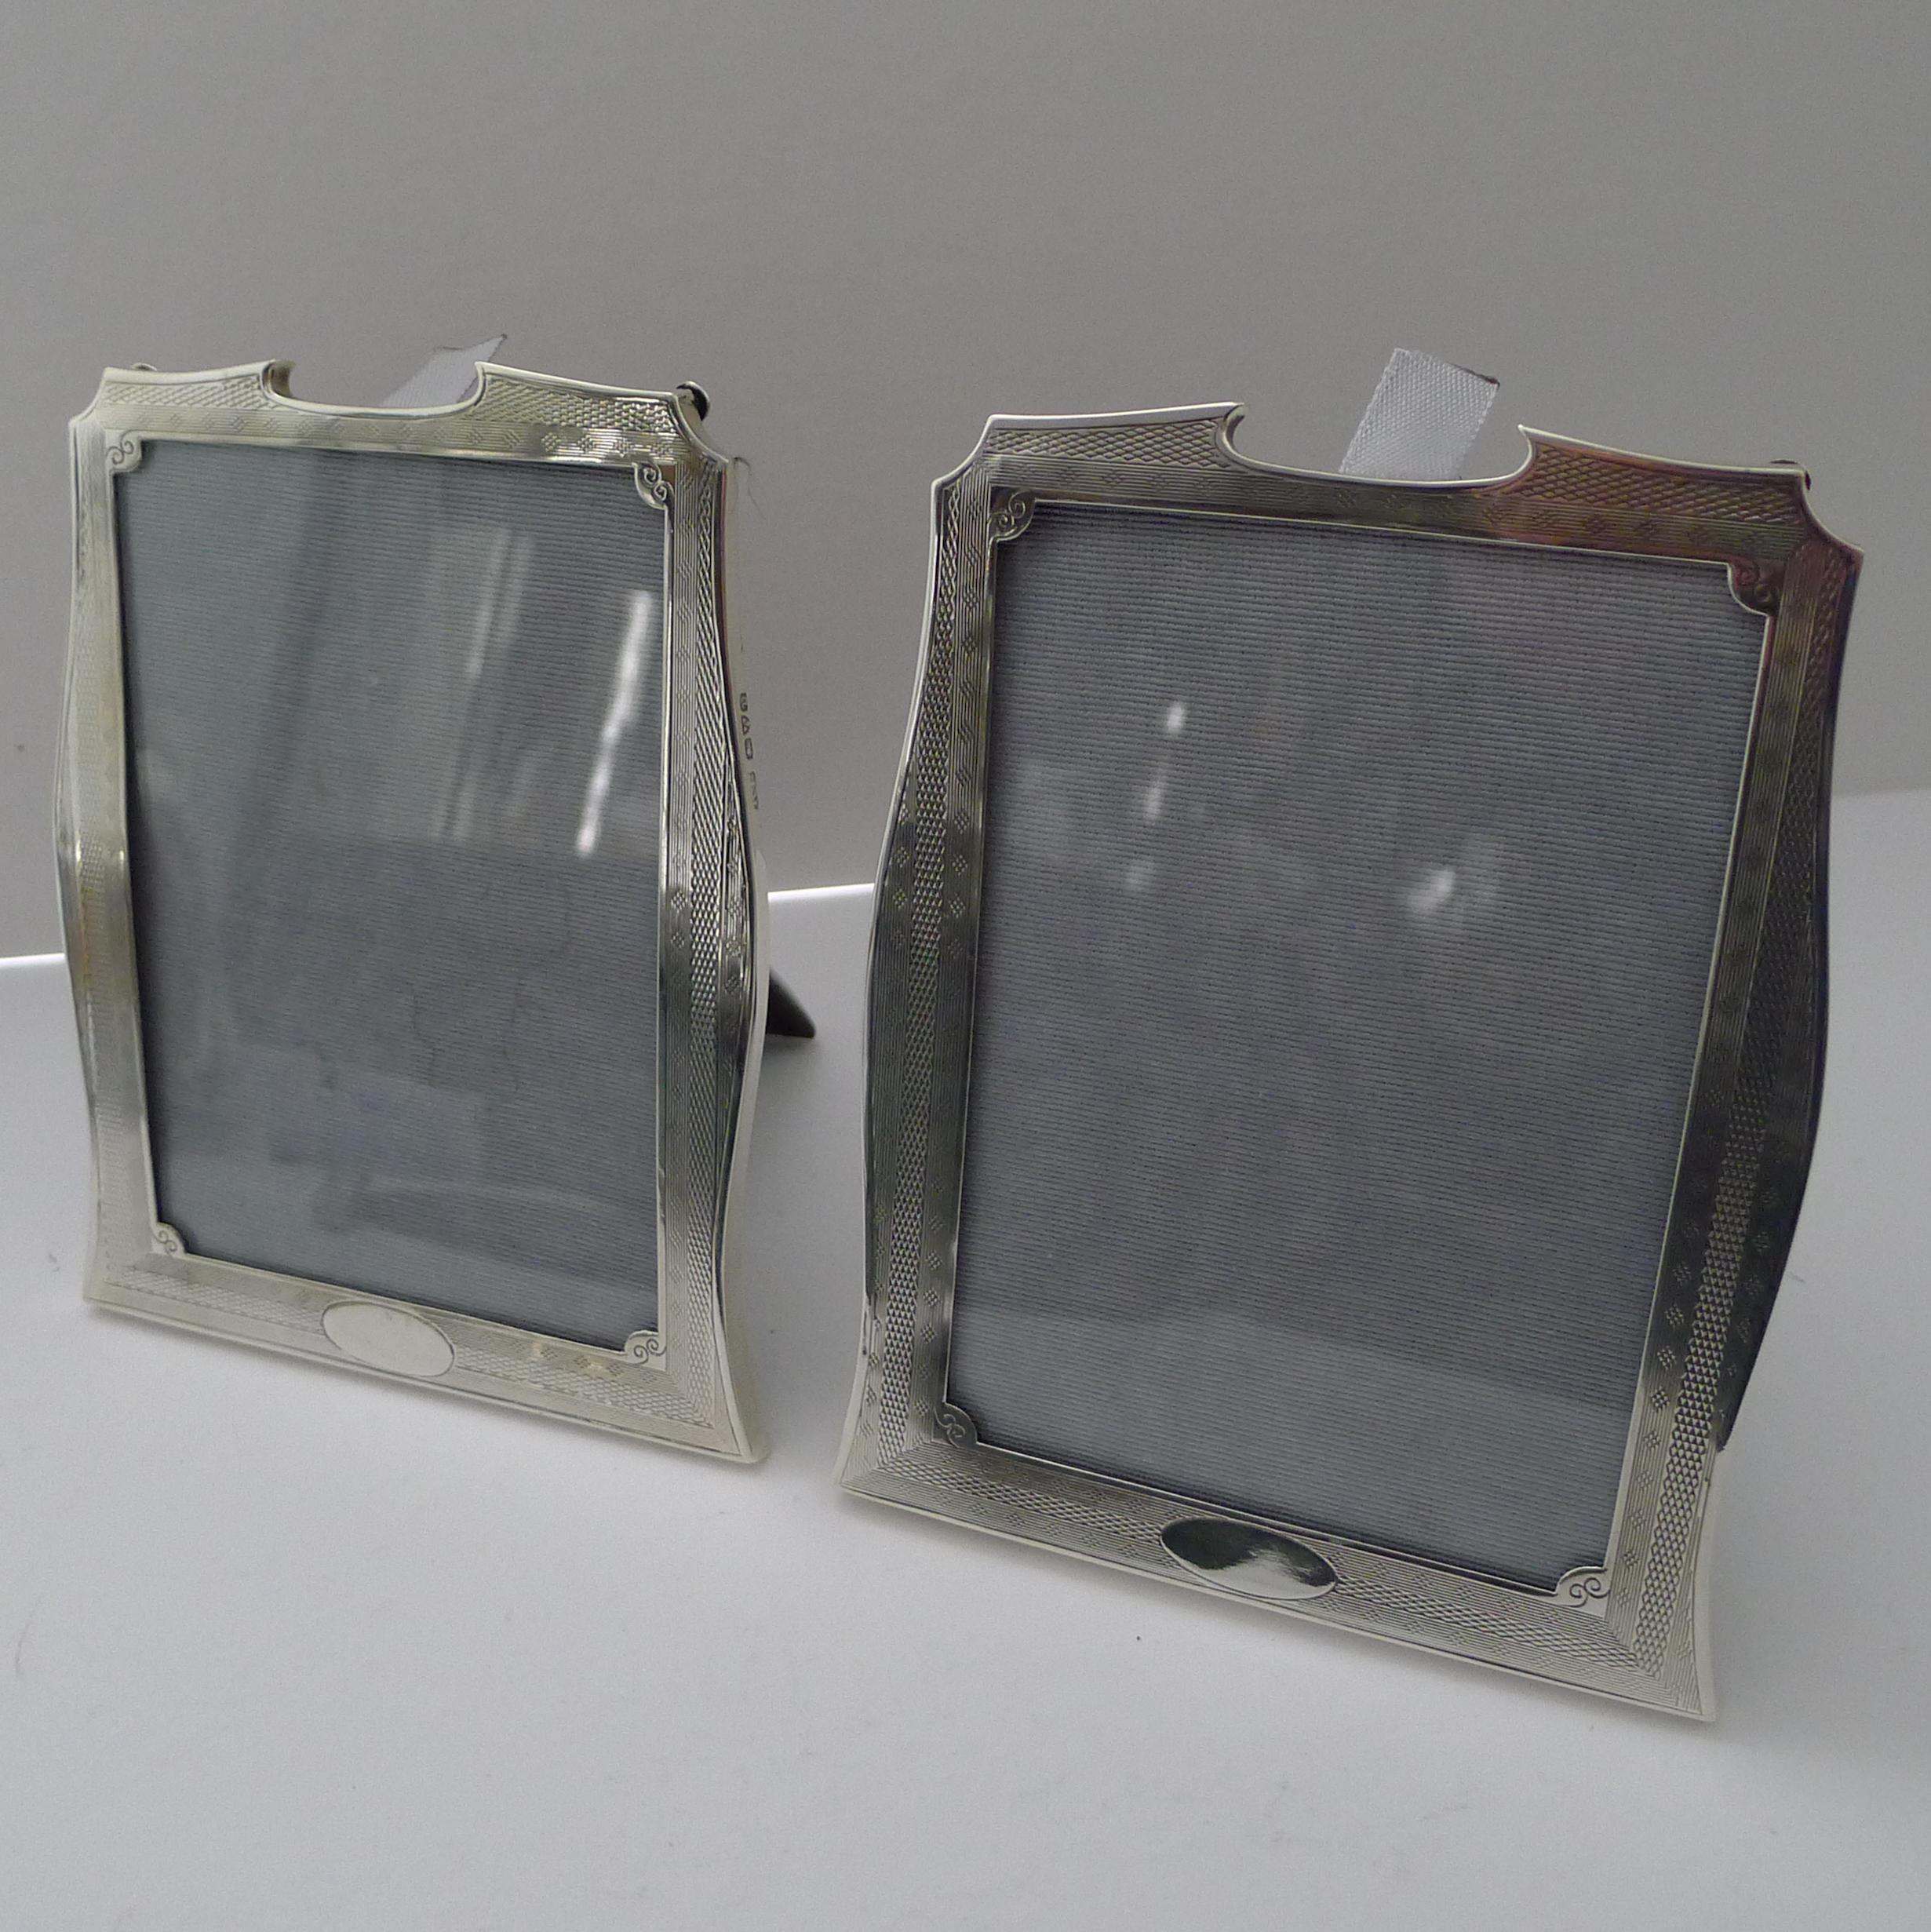 A stylish pair of Art Deco photograph frames decorated with engine turned work. The silver is fully hallmarked for Chester 1929 together with the makers mark for the well renowned silversmith, Robert Pringle & Sons.

The backs are made from solid